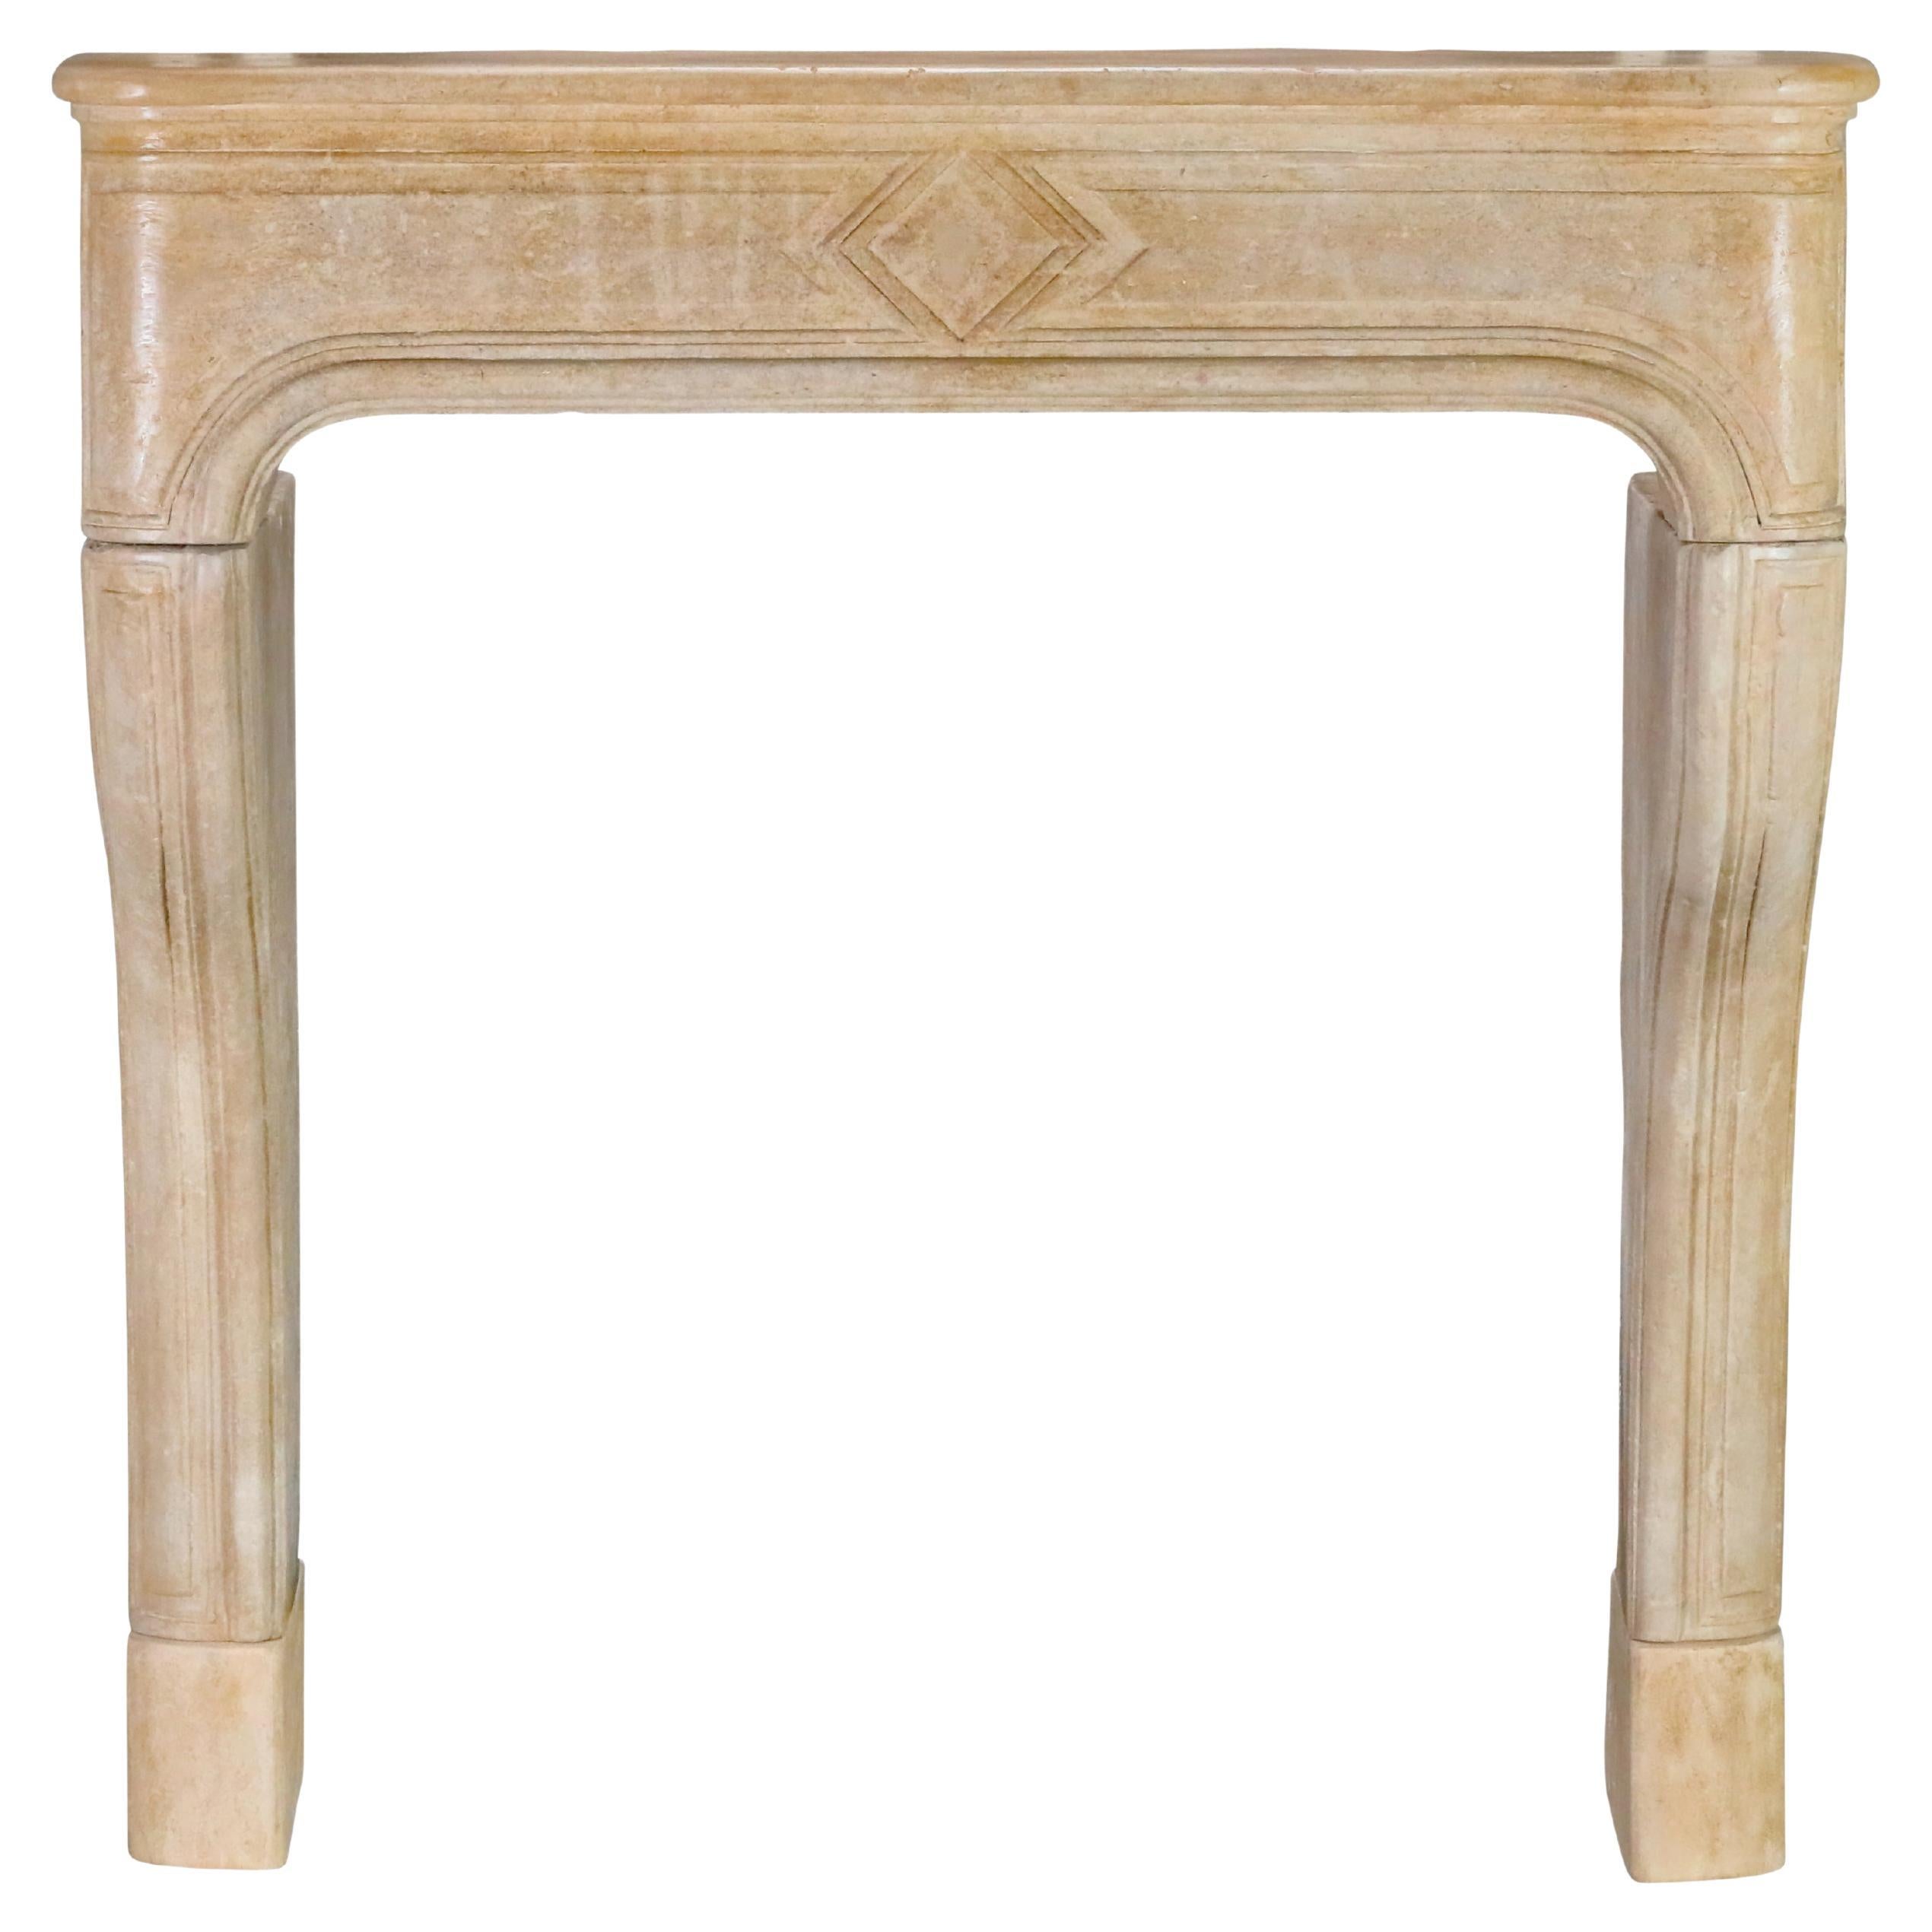 Rustic French Antique Reclaimed Extra Small Fireplace Surround In Limestone For Sale